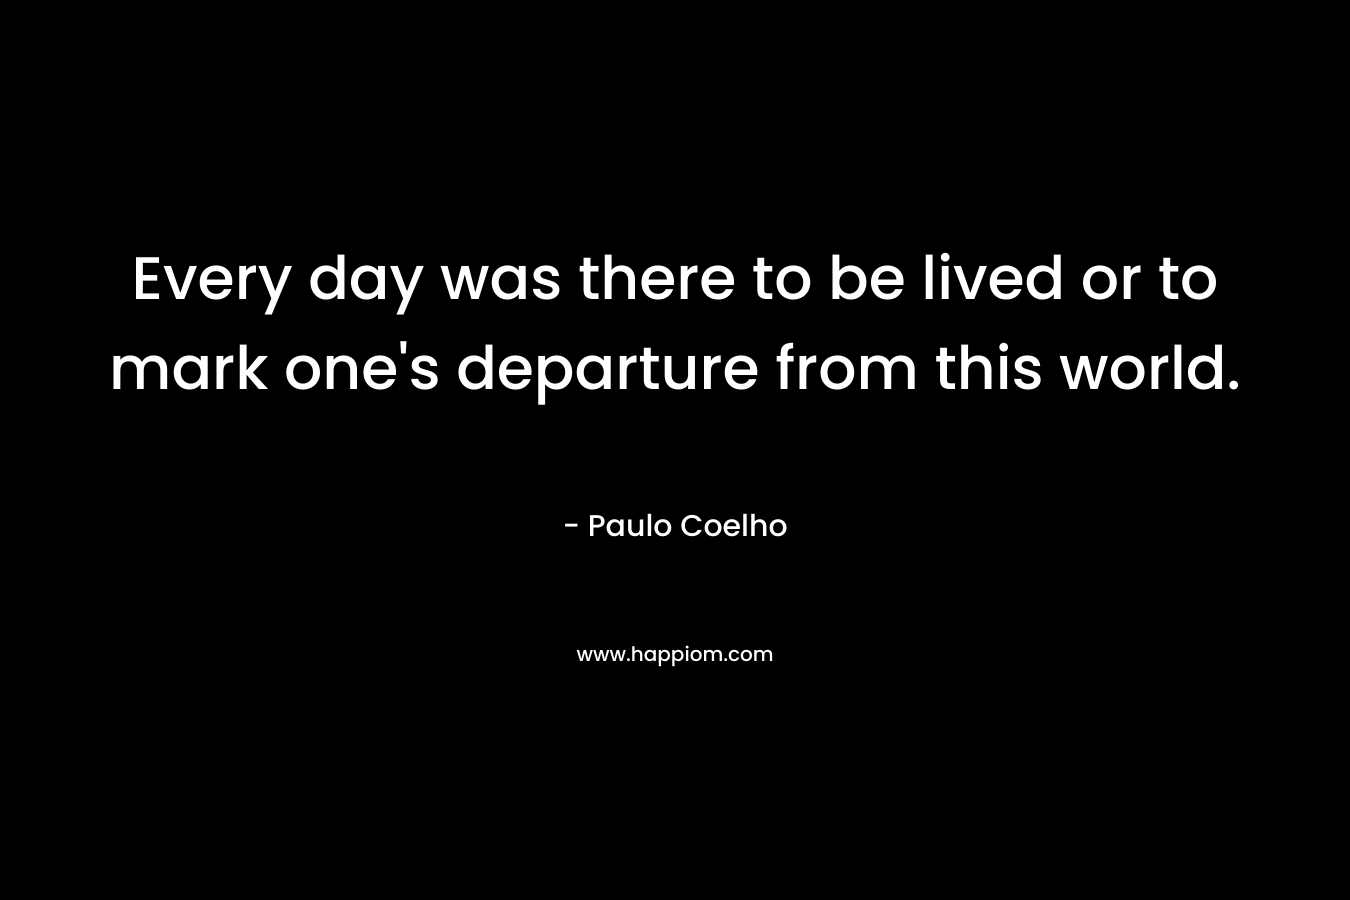 Every day was there to be lived or to mark one's departure from this world.